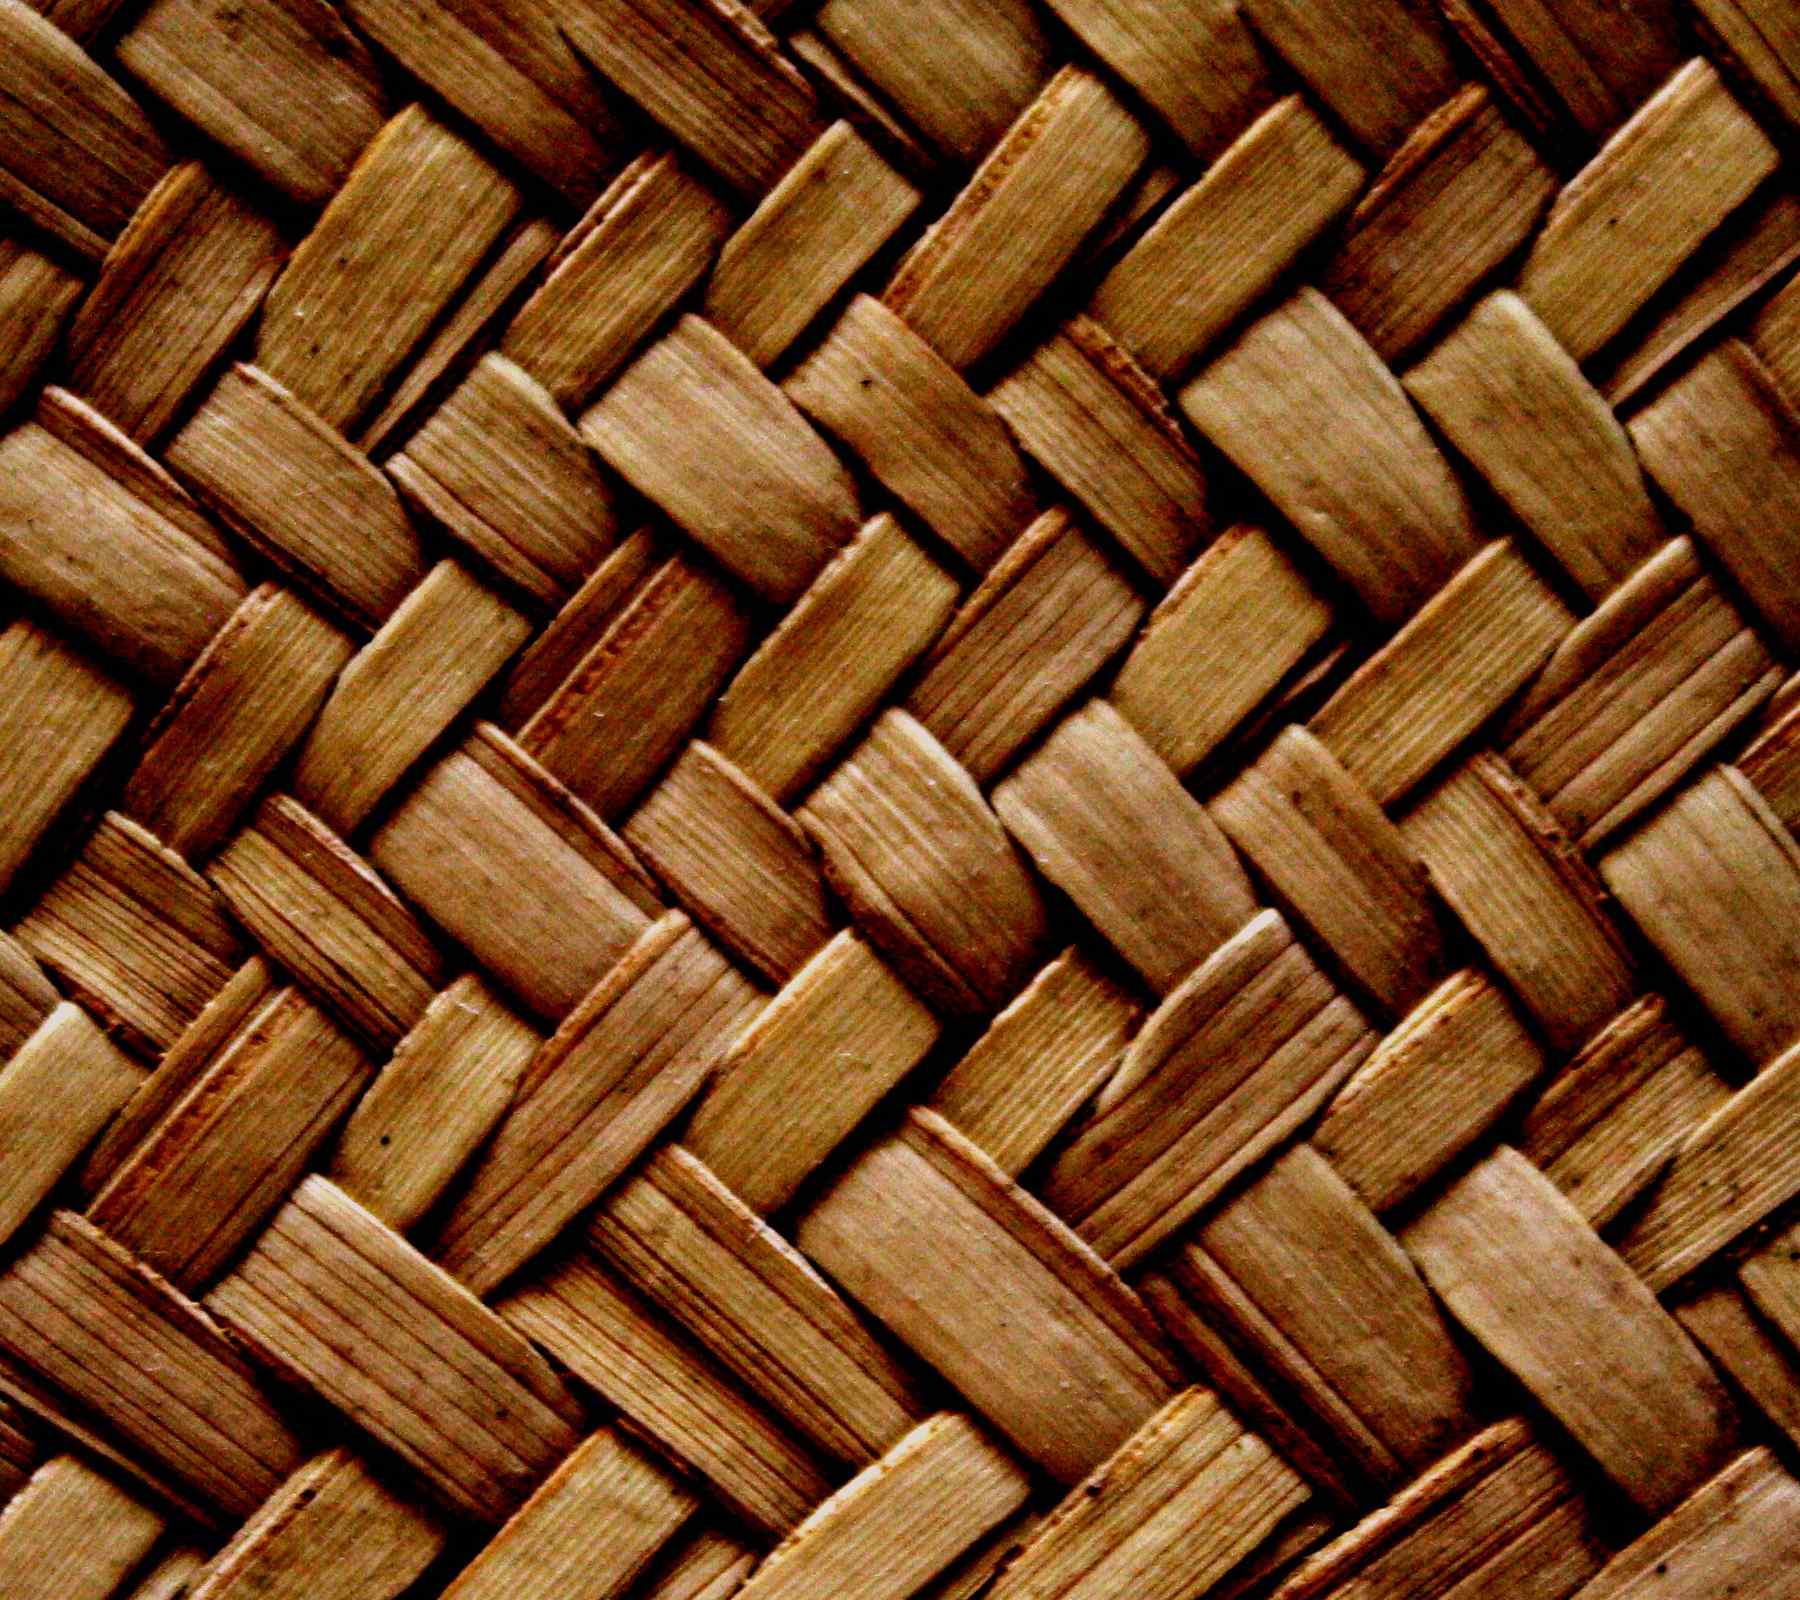 Woven Basket Background 1800x1600 Background Image HD Wallpapers Download Free Images Wallpaper [wallpaper981.blogspot.com]